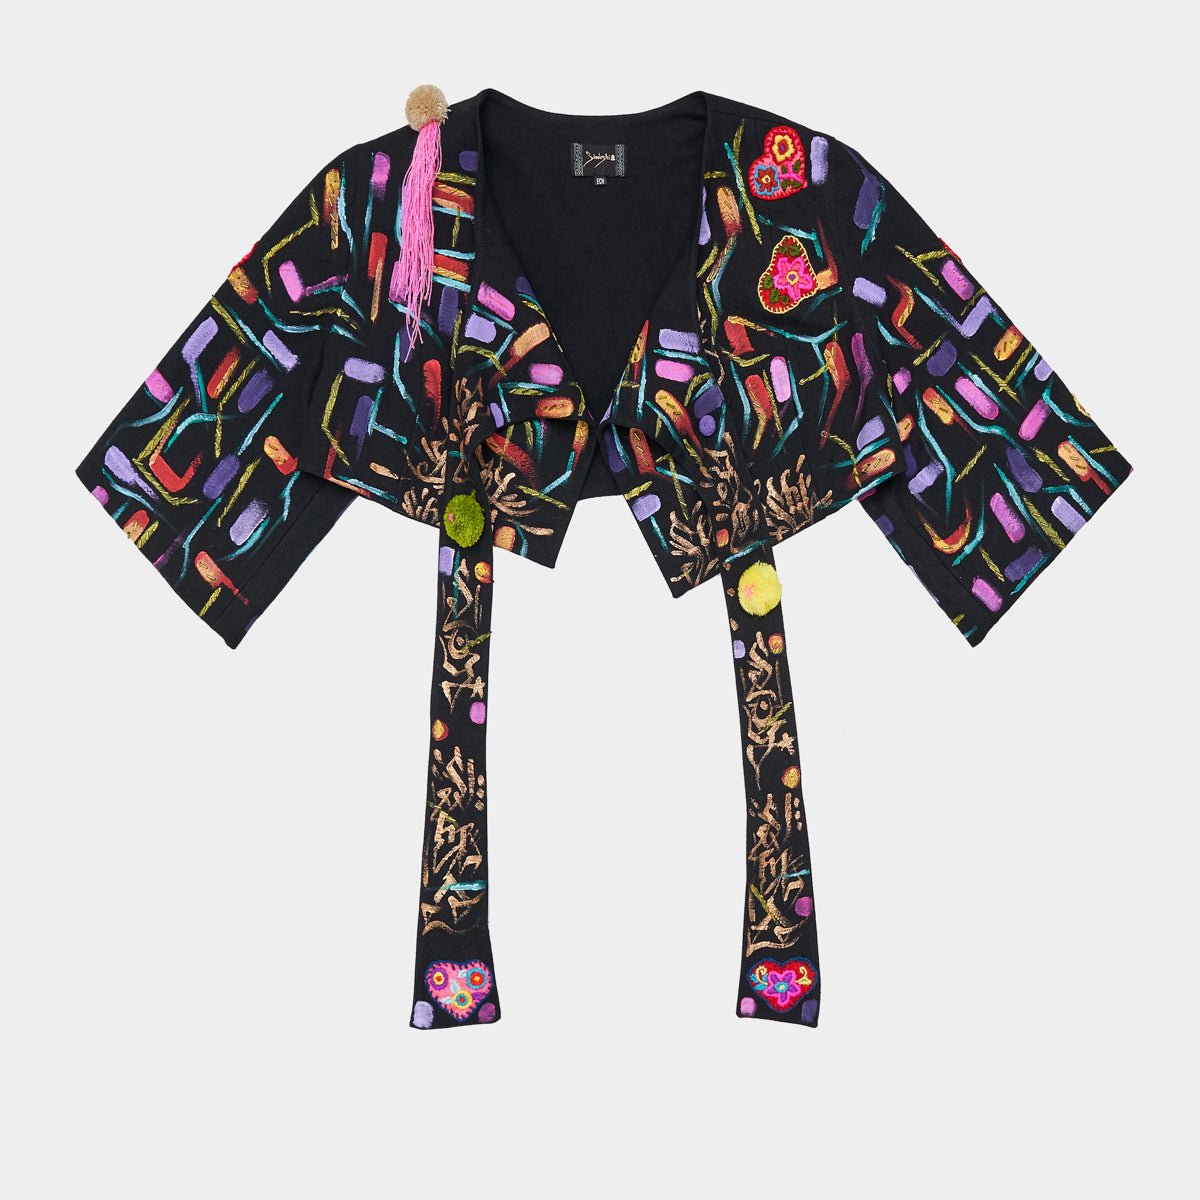 HAND-PAINTED AND HAND-EMBROIDERED JACKET - TEXTILES MAYAS